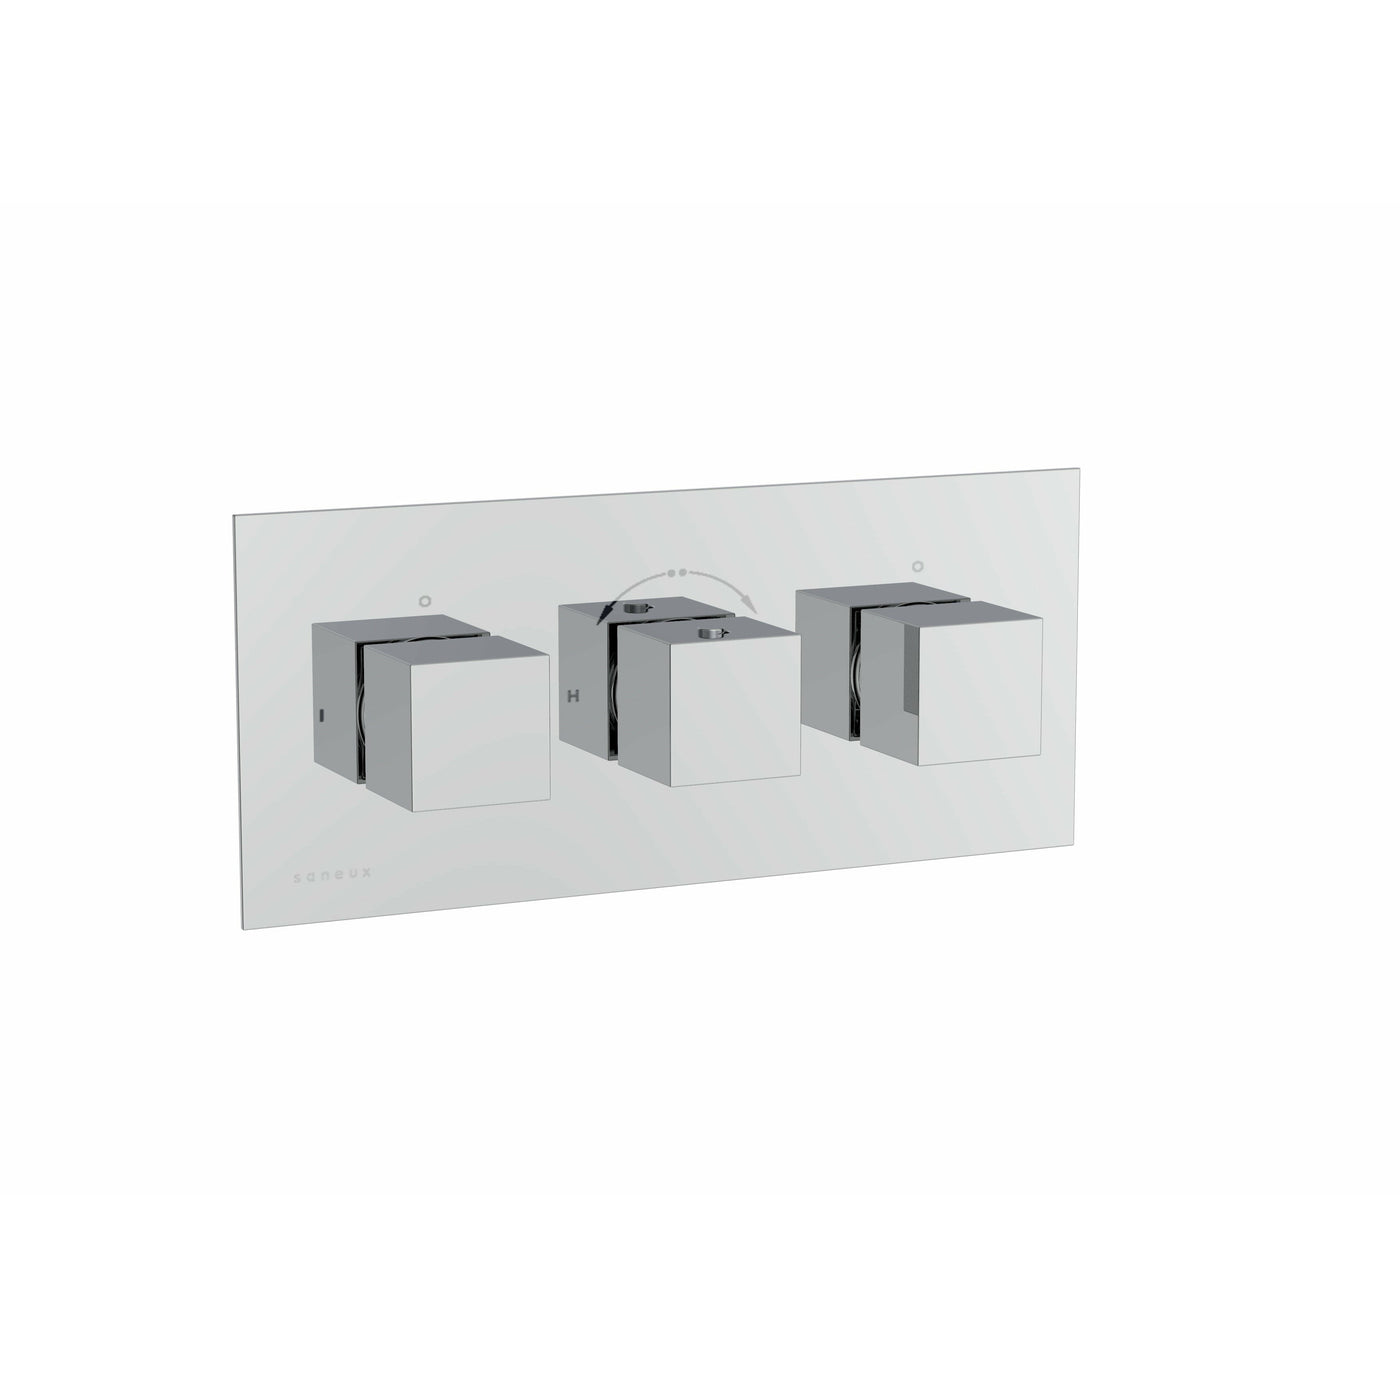 Saneux Chrome 3 hole 3 outlets thermostatic valve handle with plate, Square Landscape - Letta London - Thermostatic Showers